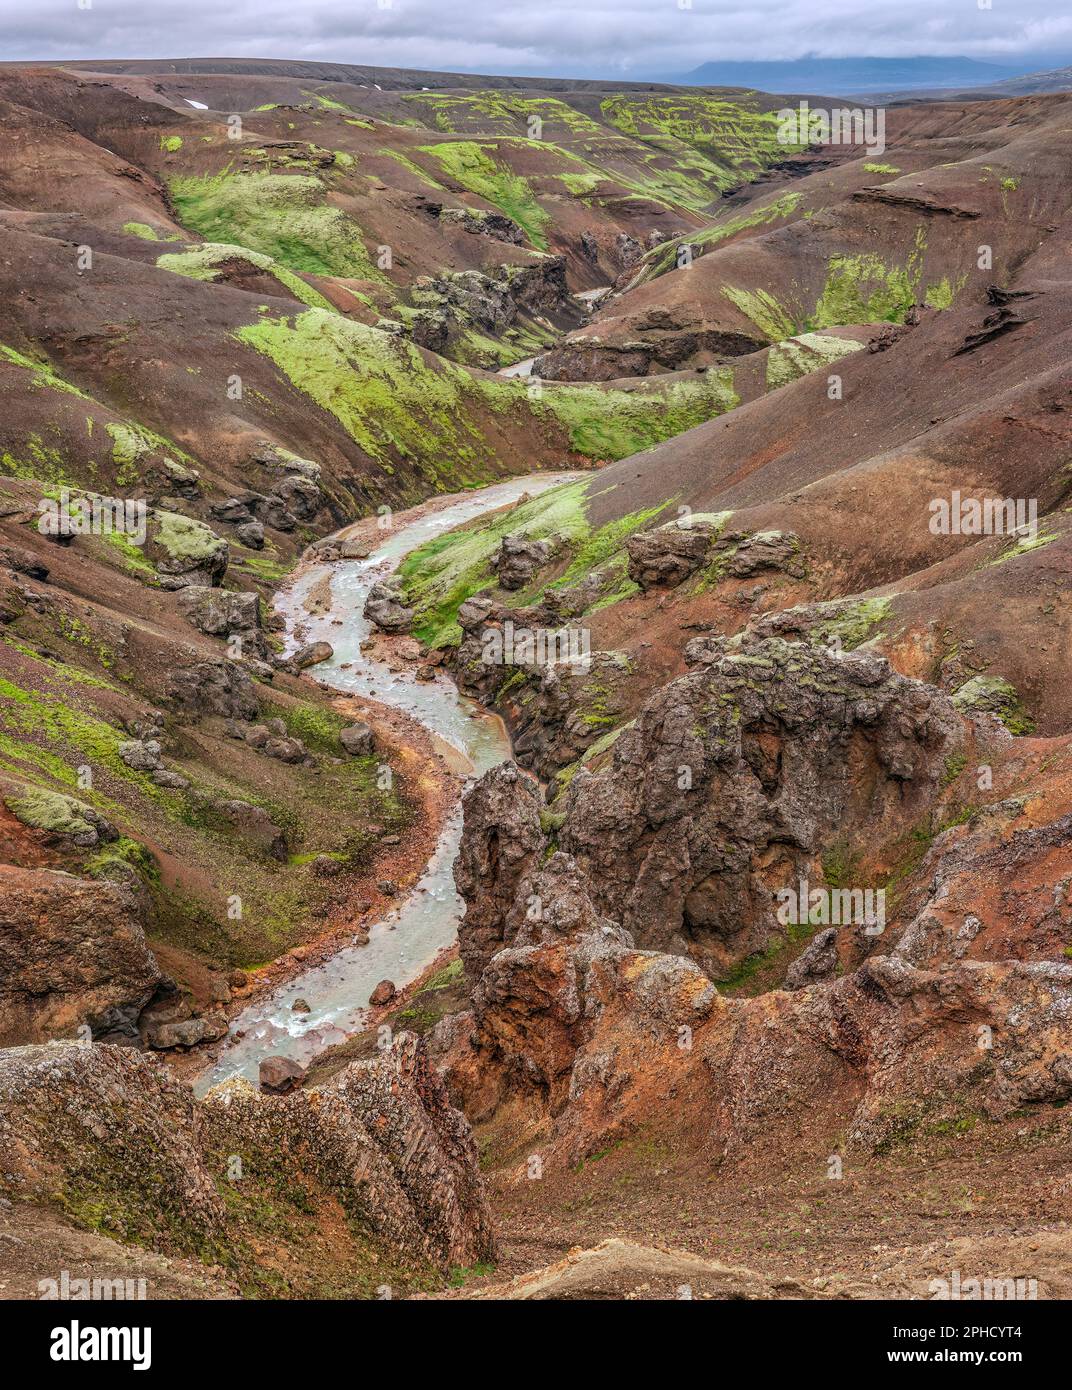 Mineral Rich Canyon (iron oxides), Geothermal Basin, Loomundur, Iceland Stock Photo